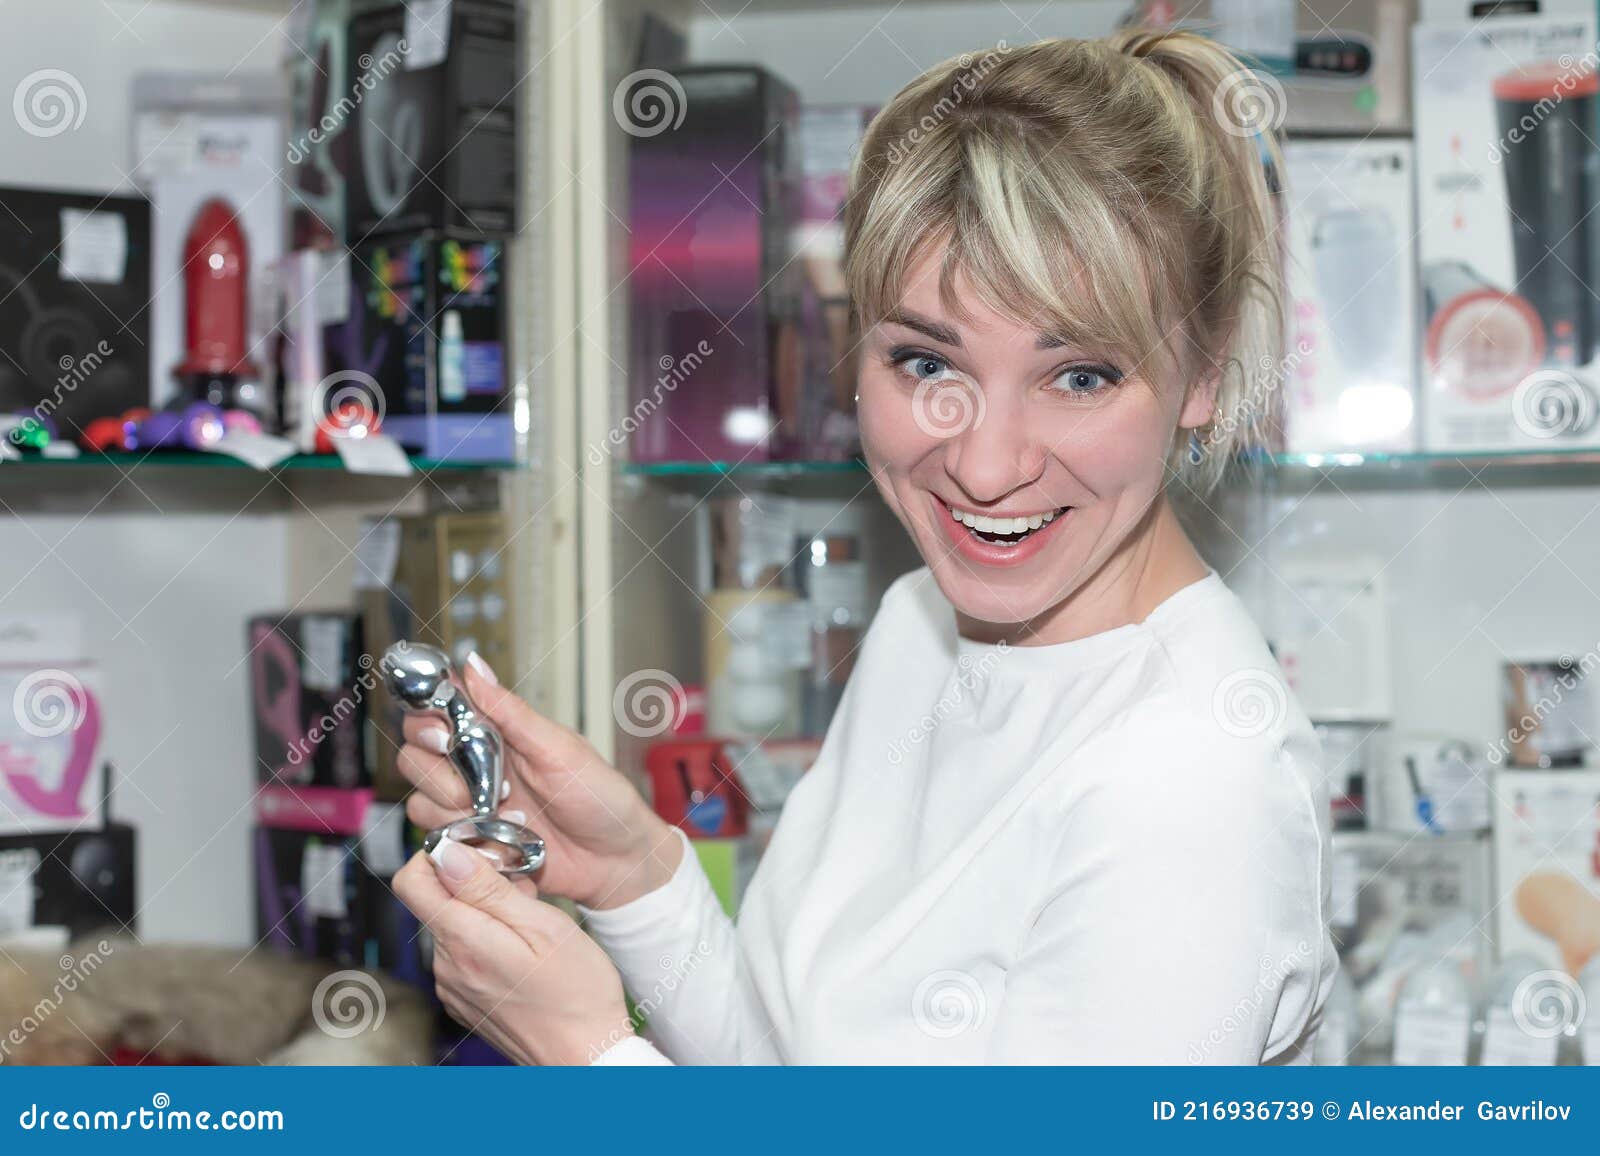 Beautiful Cute Girl Chooses A Sex Toy In An Adult Store Stock Image Image Of Client